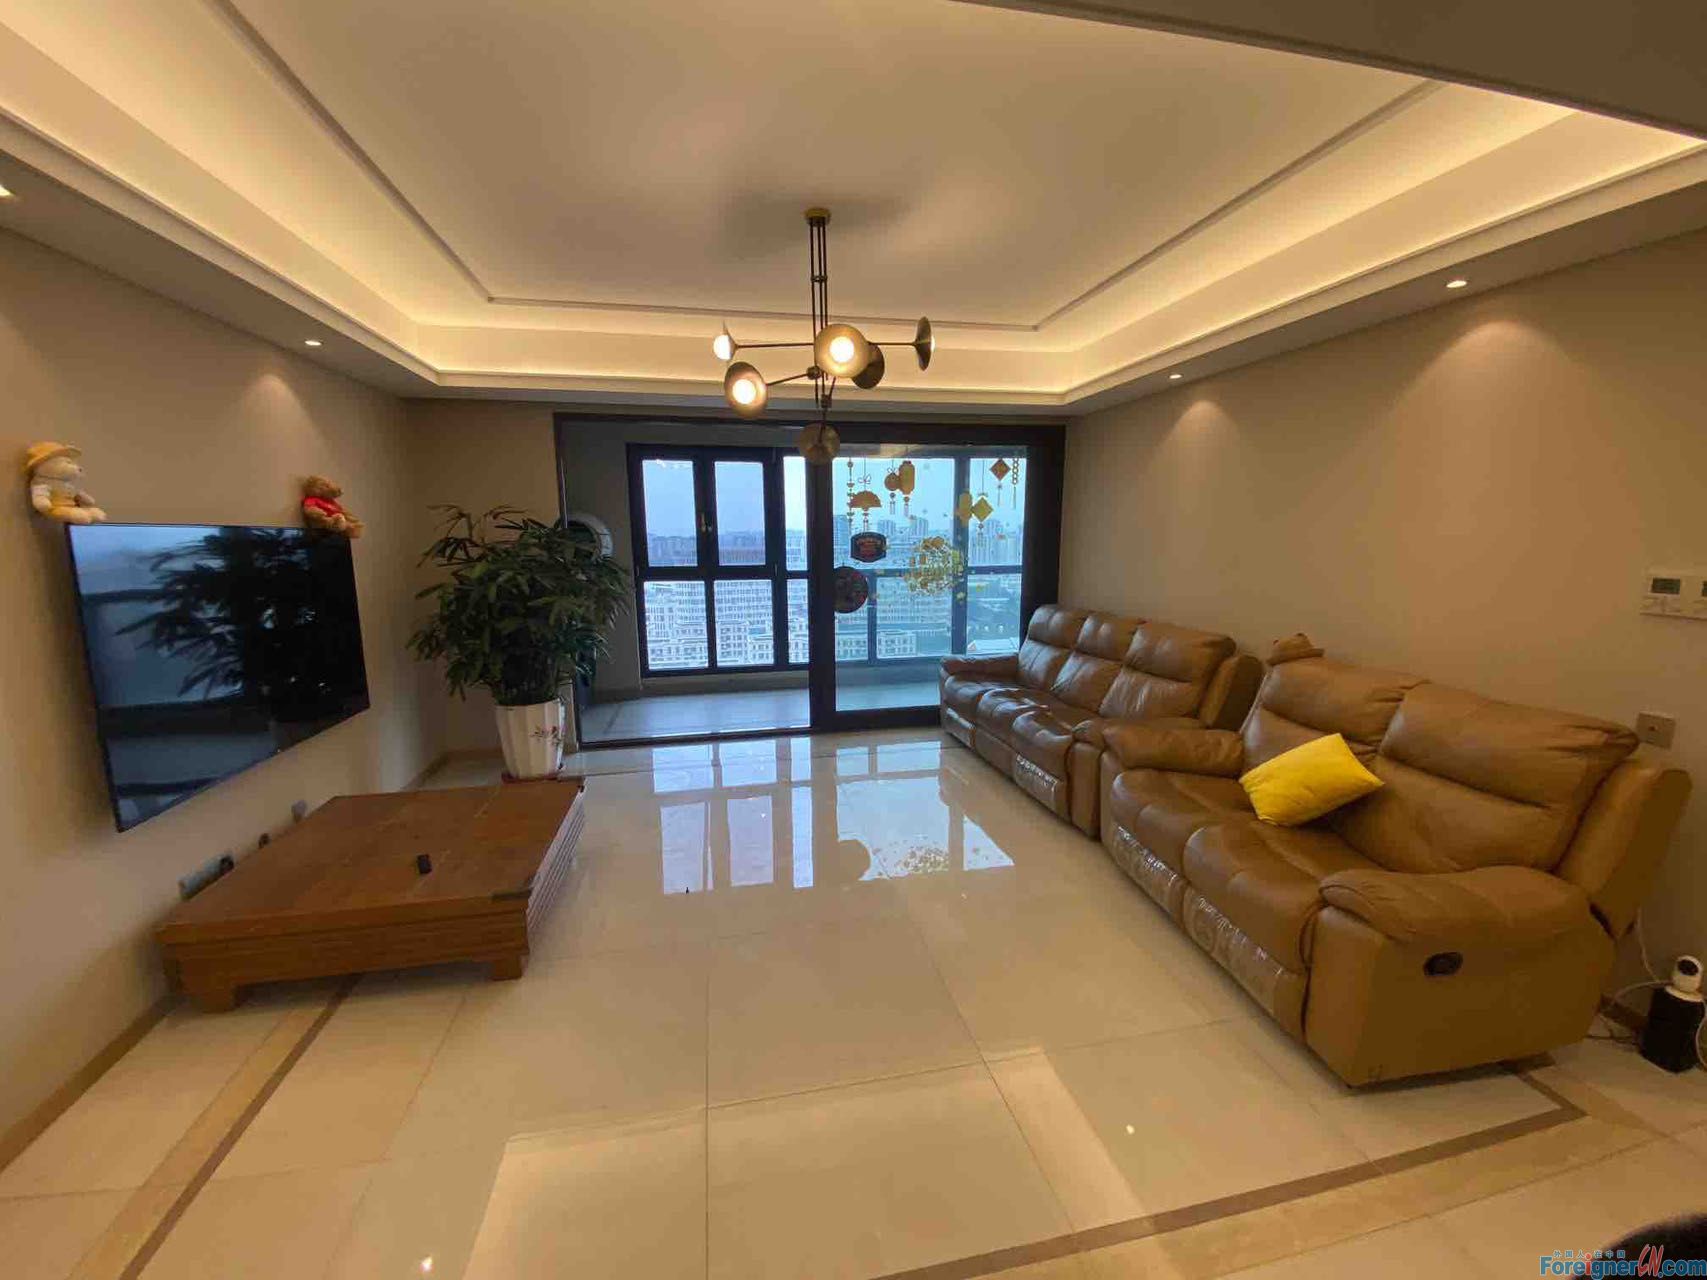 Excellent !! Nice Apartment with big living room/4bedrooms and 2 bathrooms/large Balcony,CentralAC,Heating System /Close to International schools SSIS;dulwish and OCAC